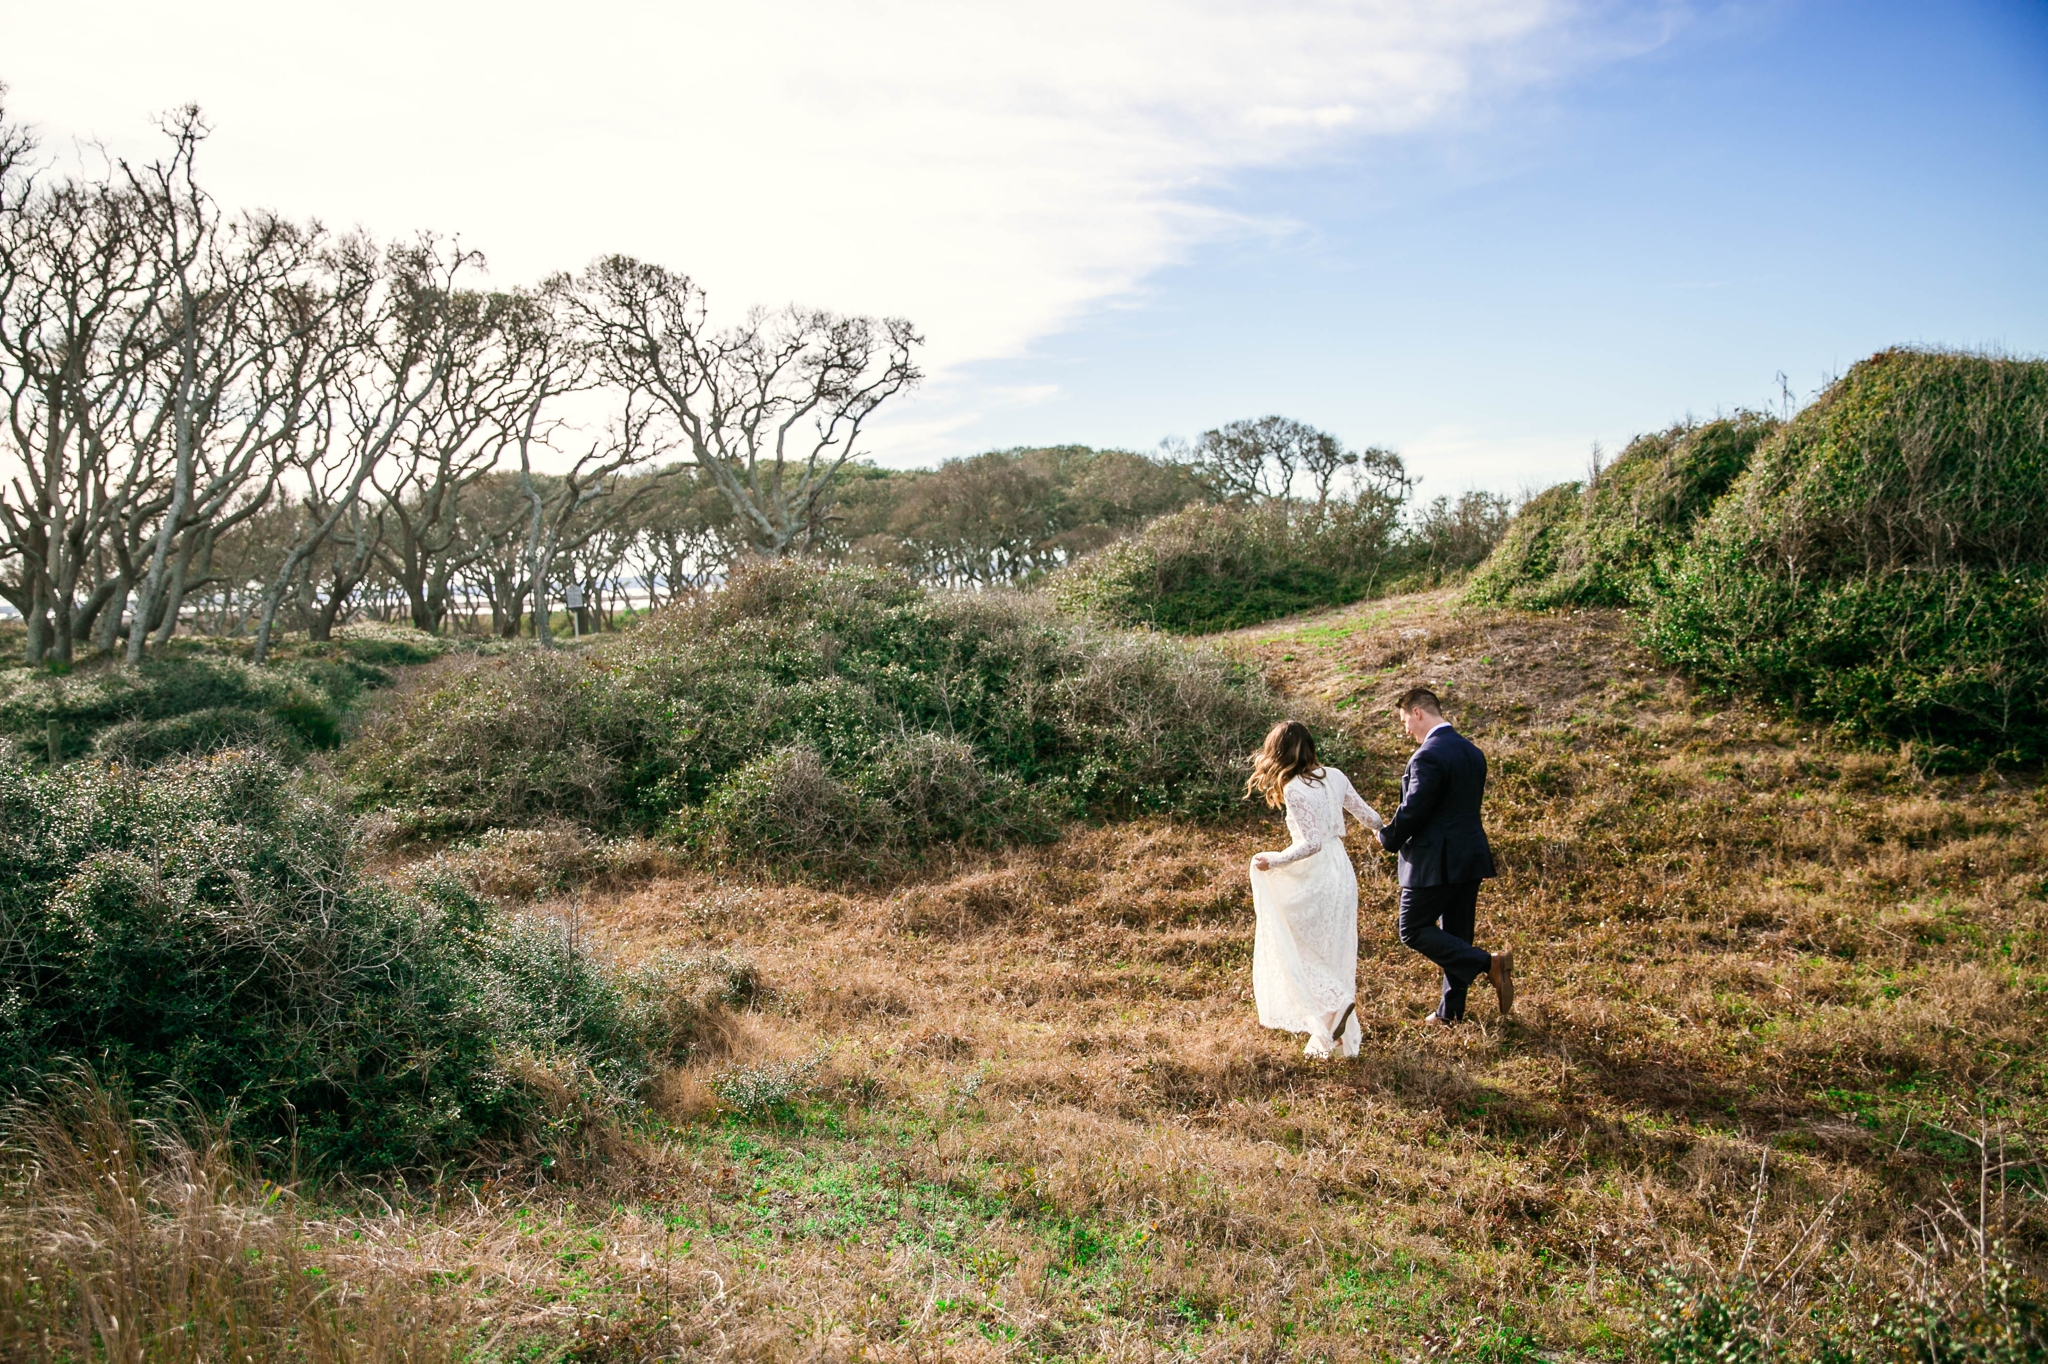 Bride and Groom walking in Lush Green Hills - Beach Elopement Photography - wedding dress by asos with purple and pink flowers and navy suit - oahu hawaii wedding photographer